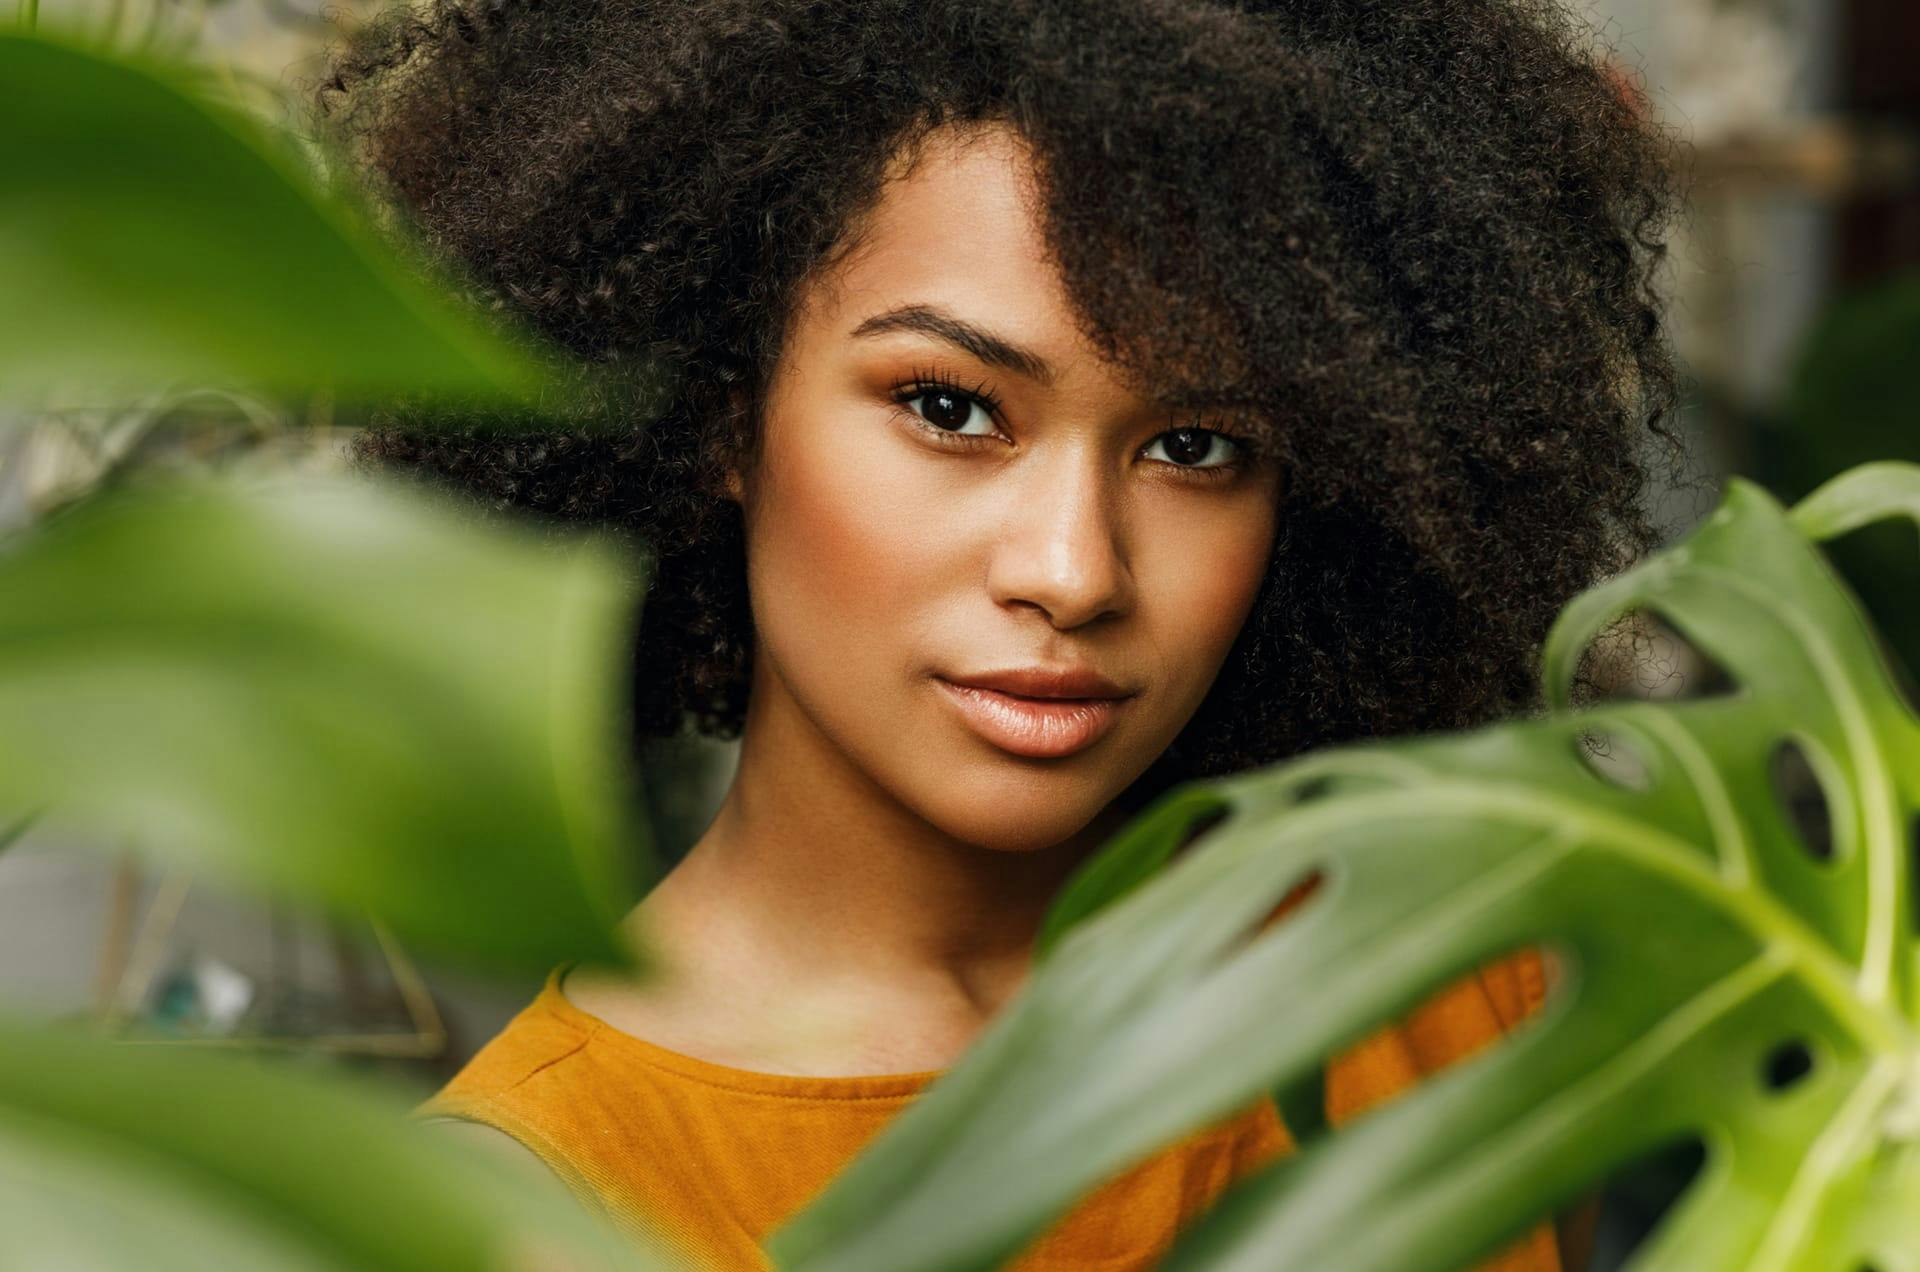 Woman with curly black hair behind some plant leaves